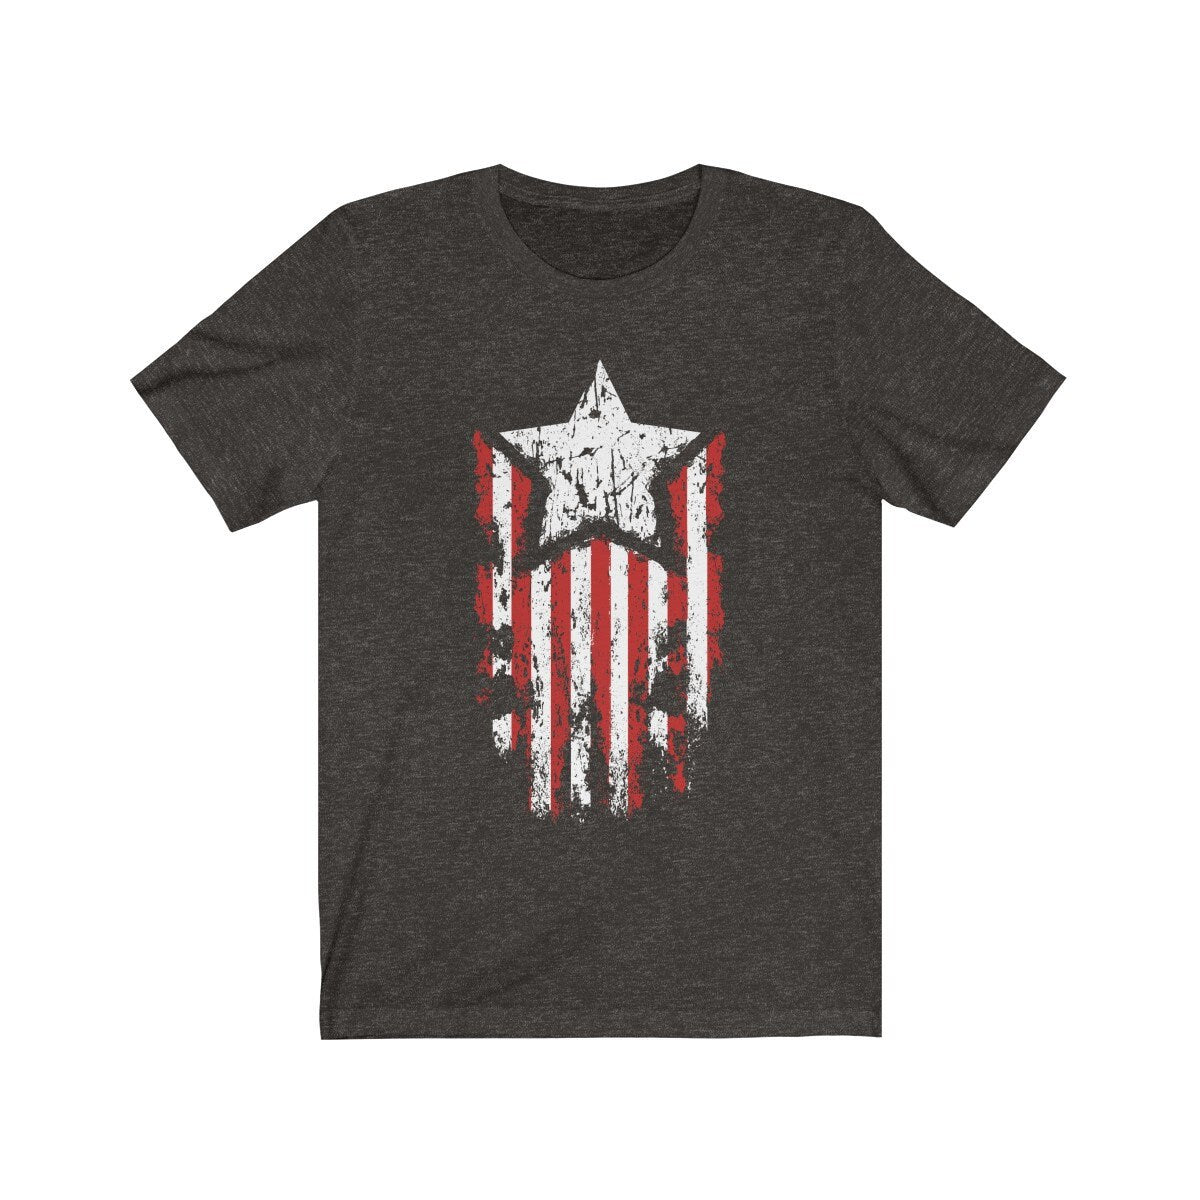 Patriotic Birthday Gift T-Shirt for Men or Husband, American Flag with Star - 37 Design Unit